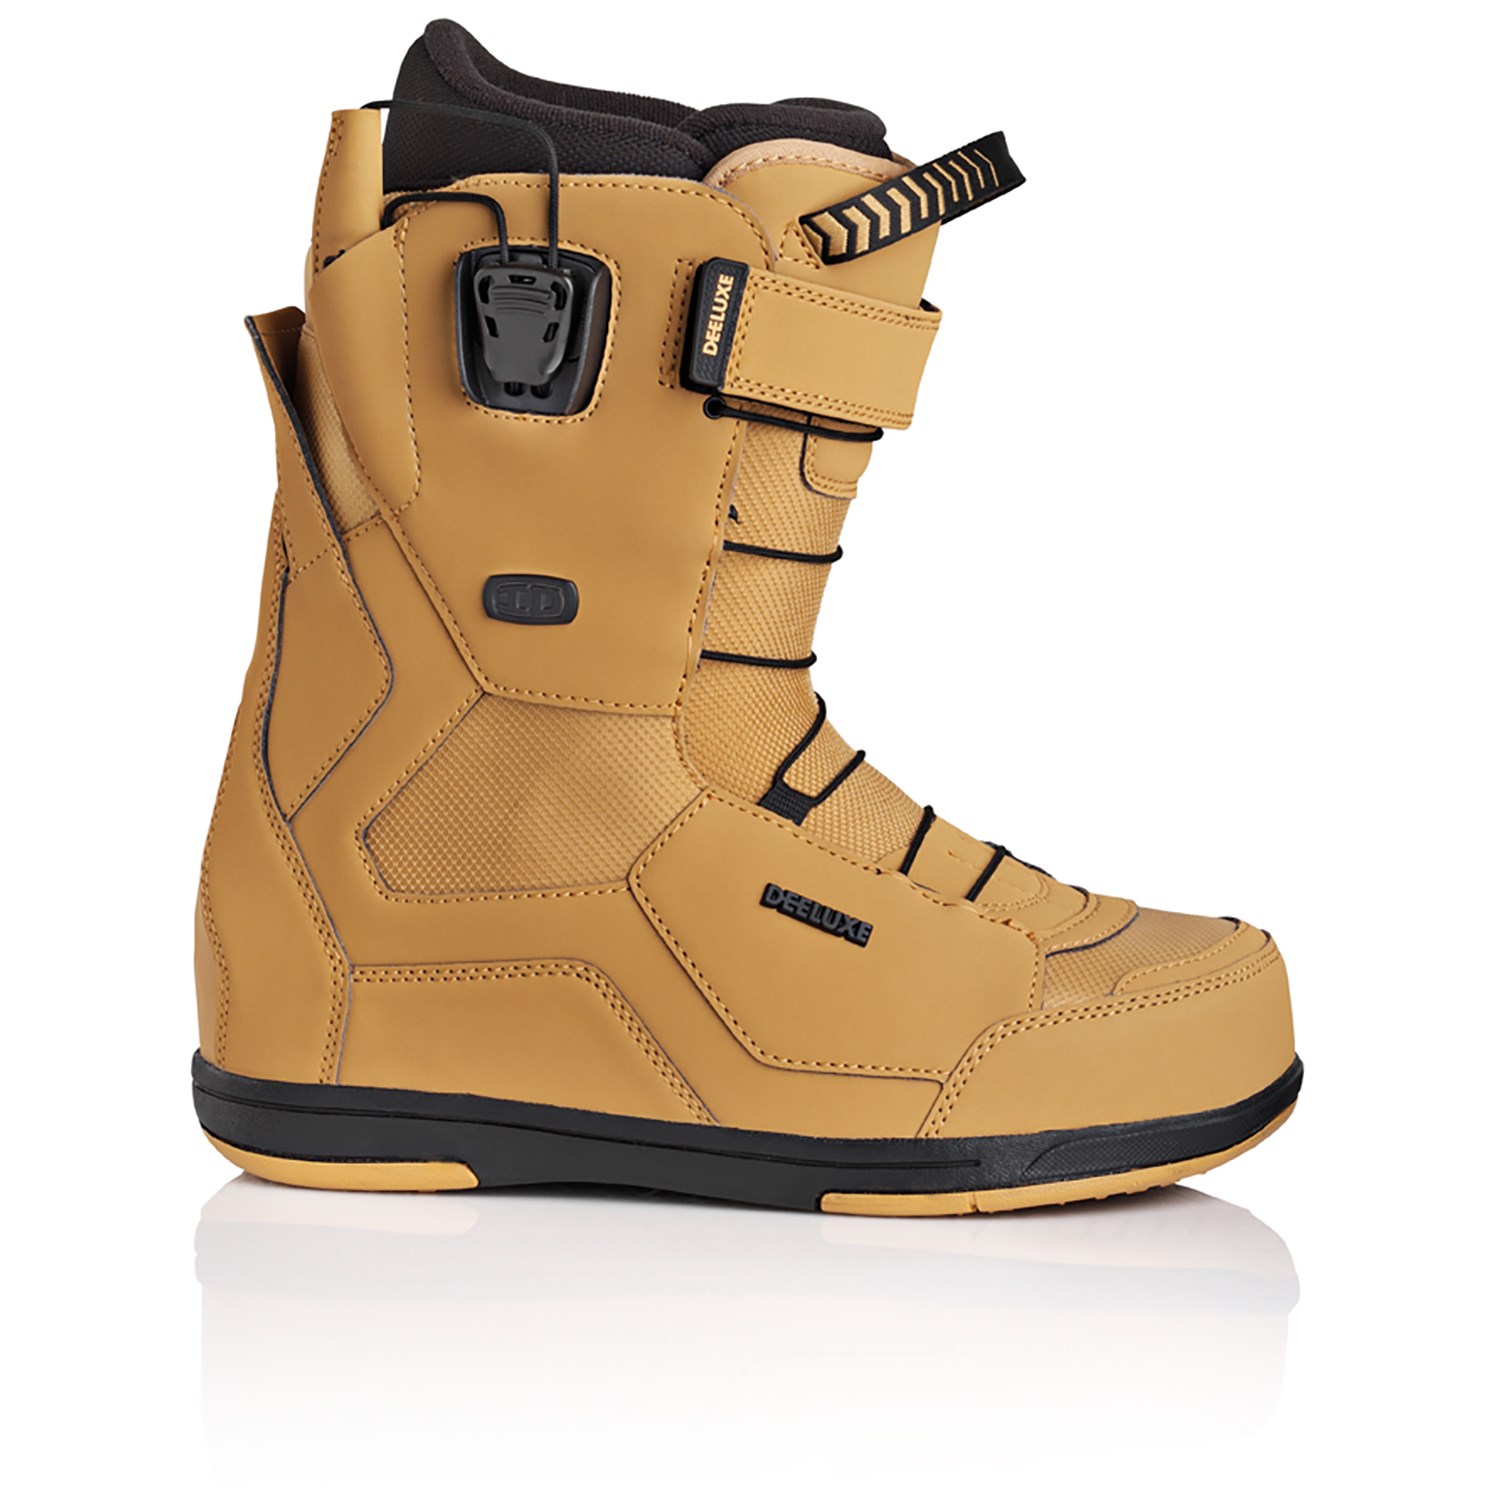 Deeluxe Del Mar Limited Edition Snowboarding Boots Mens Black 